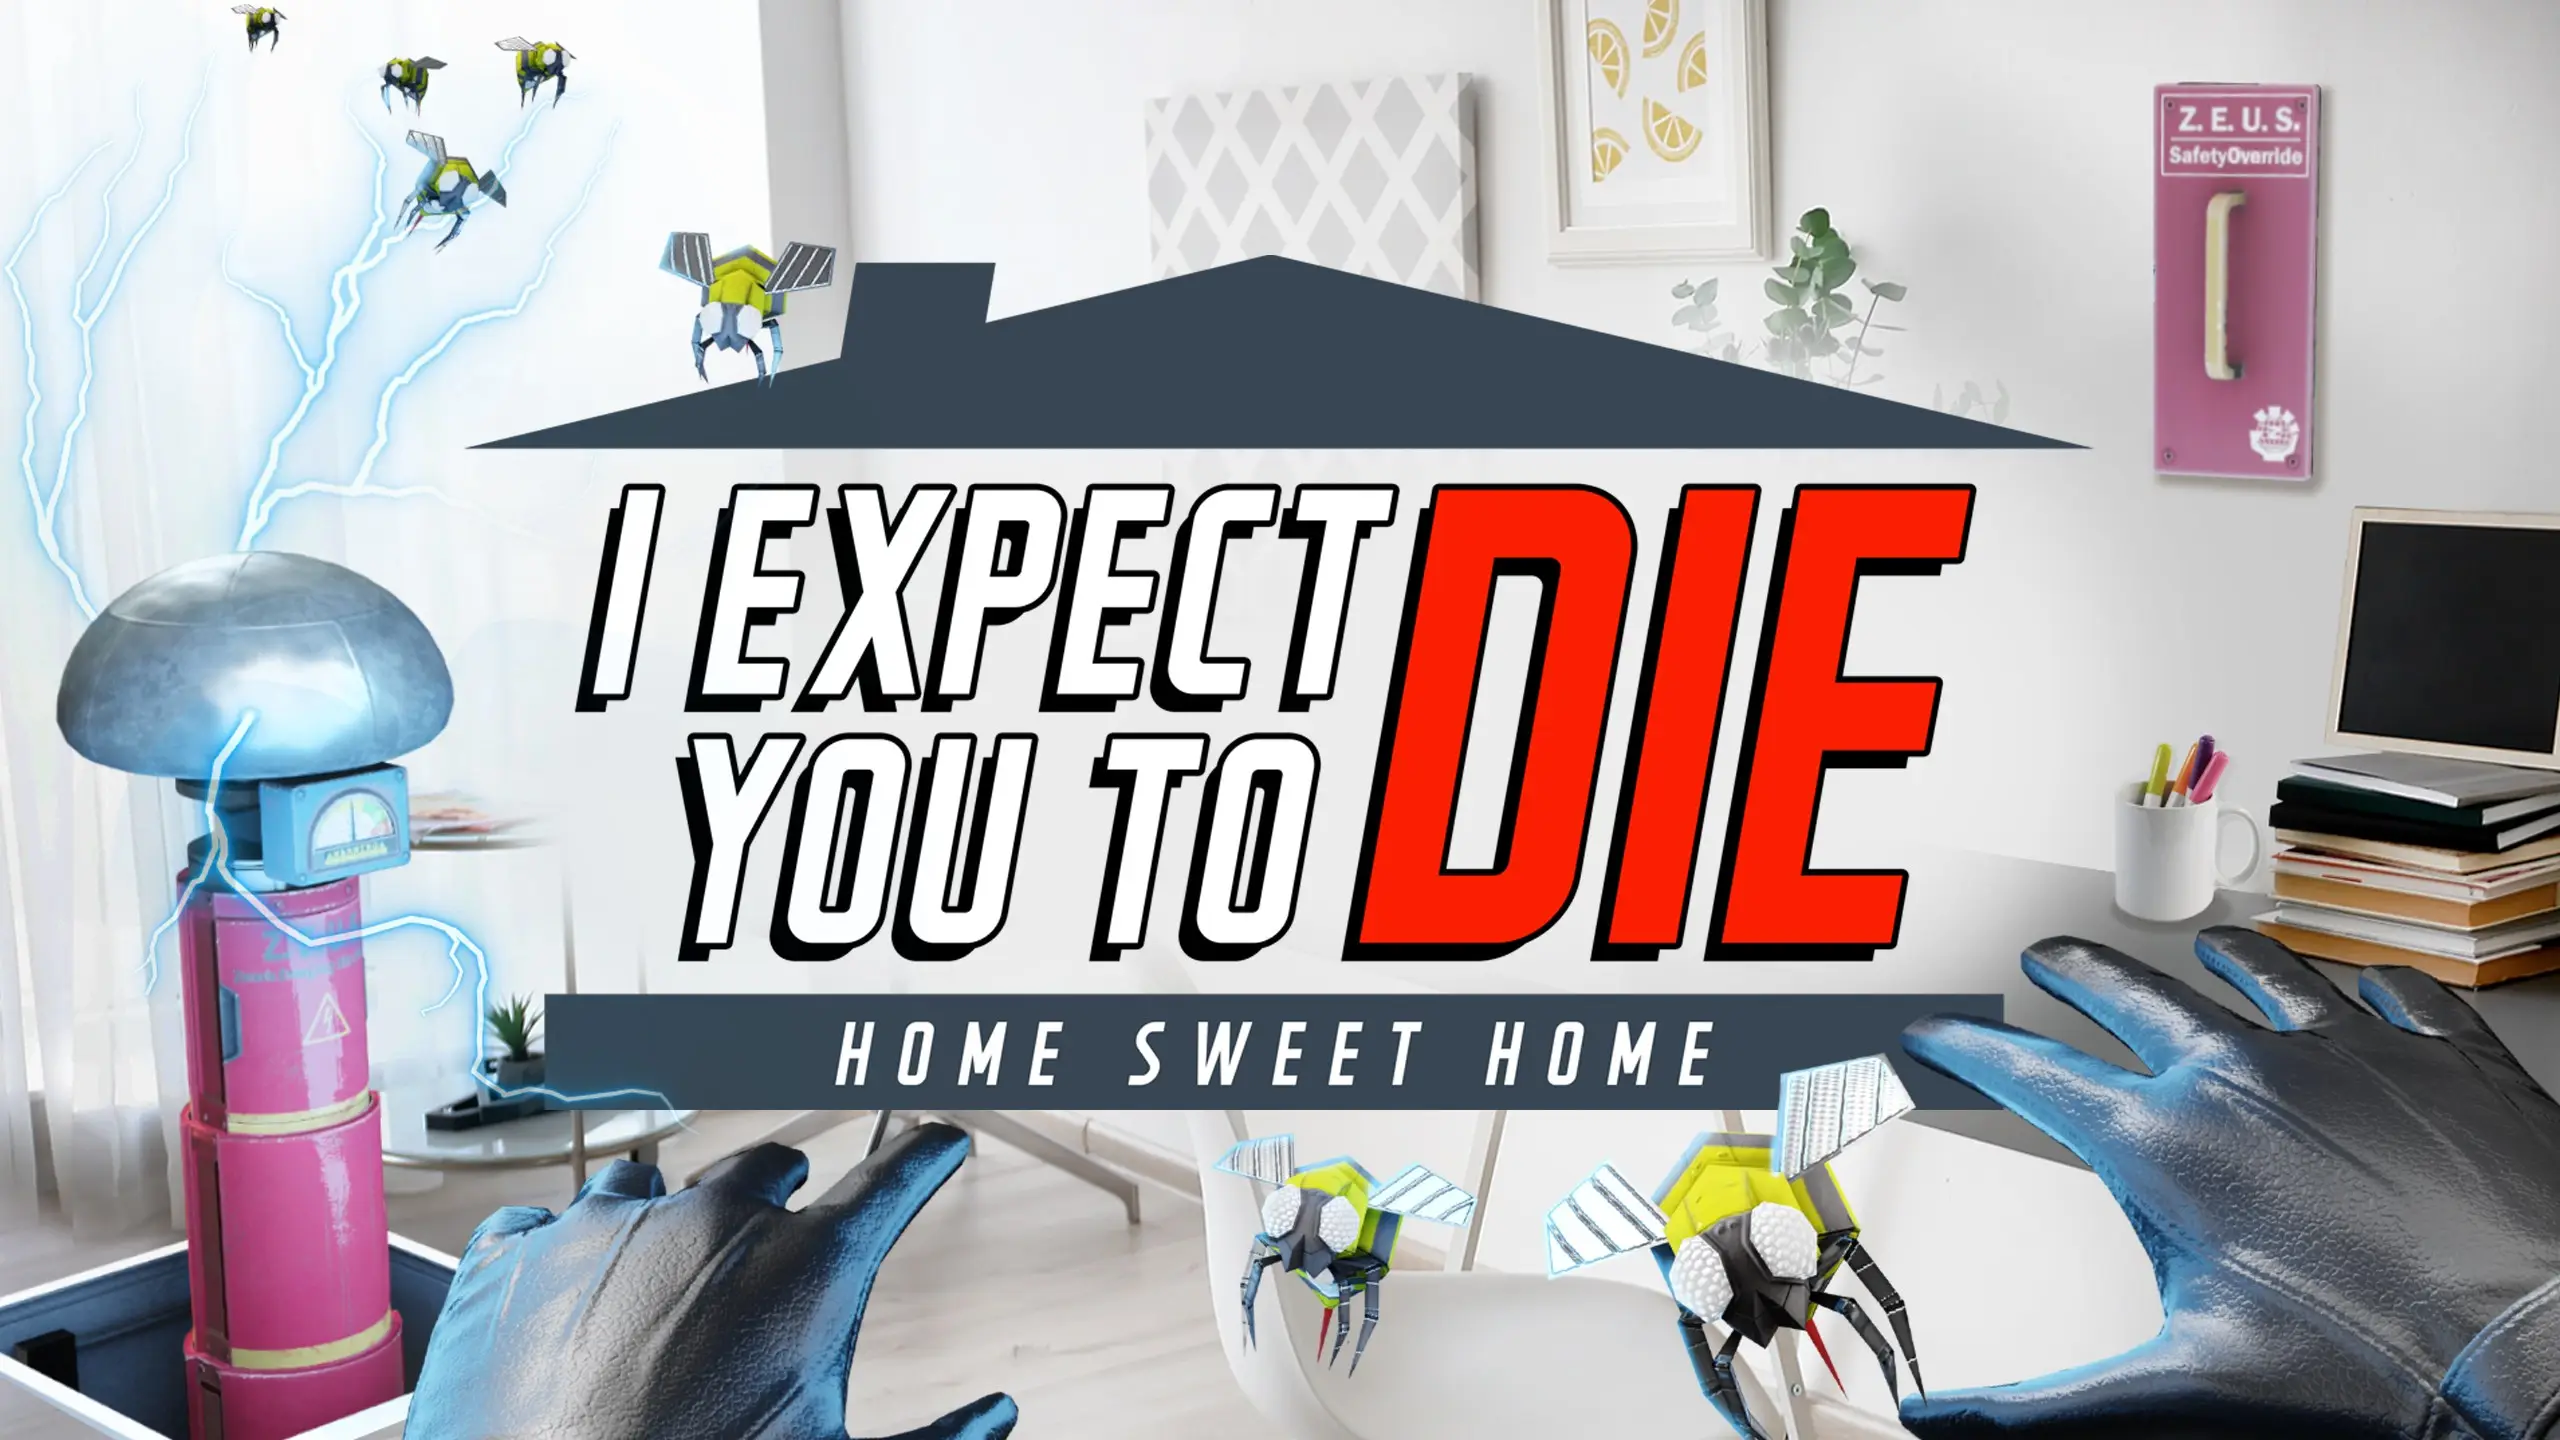 I Expect You To Die: Home Sweet Home (Oculus Quest VR Game)